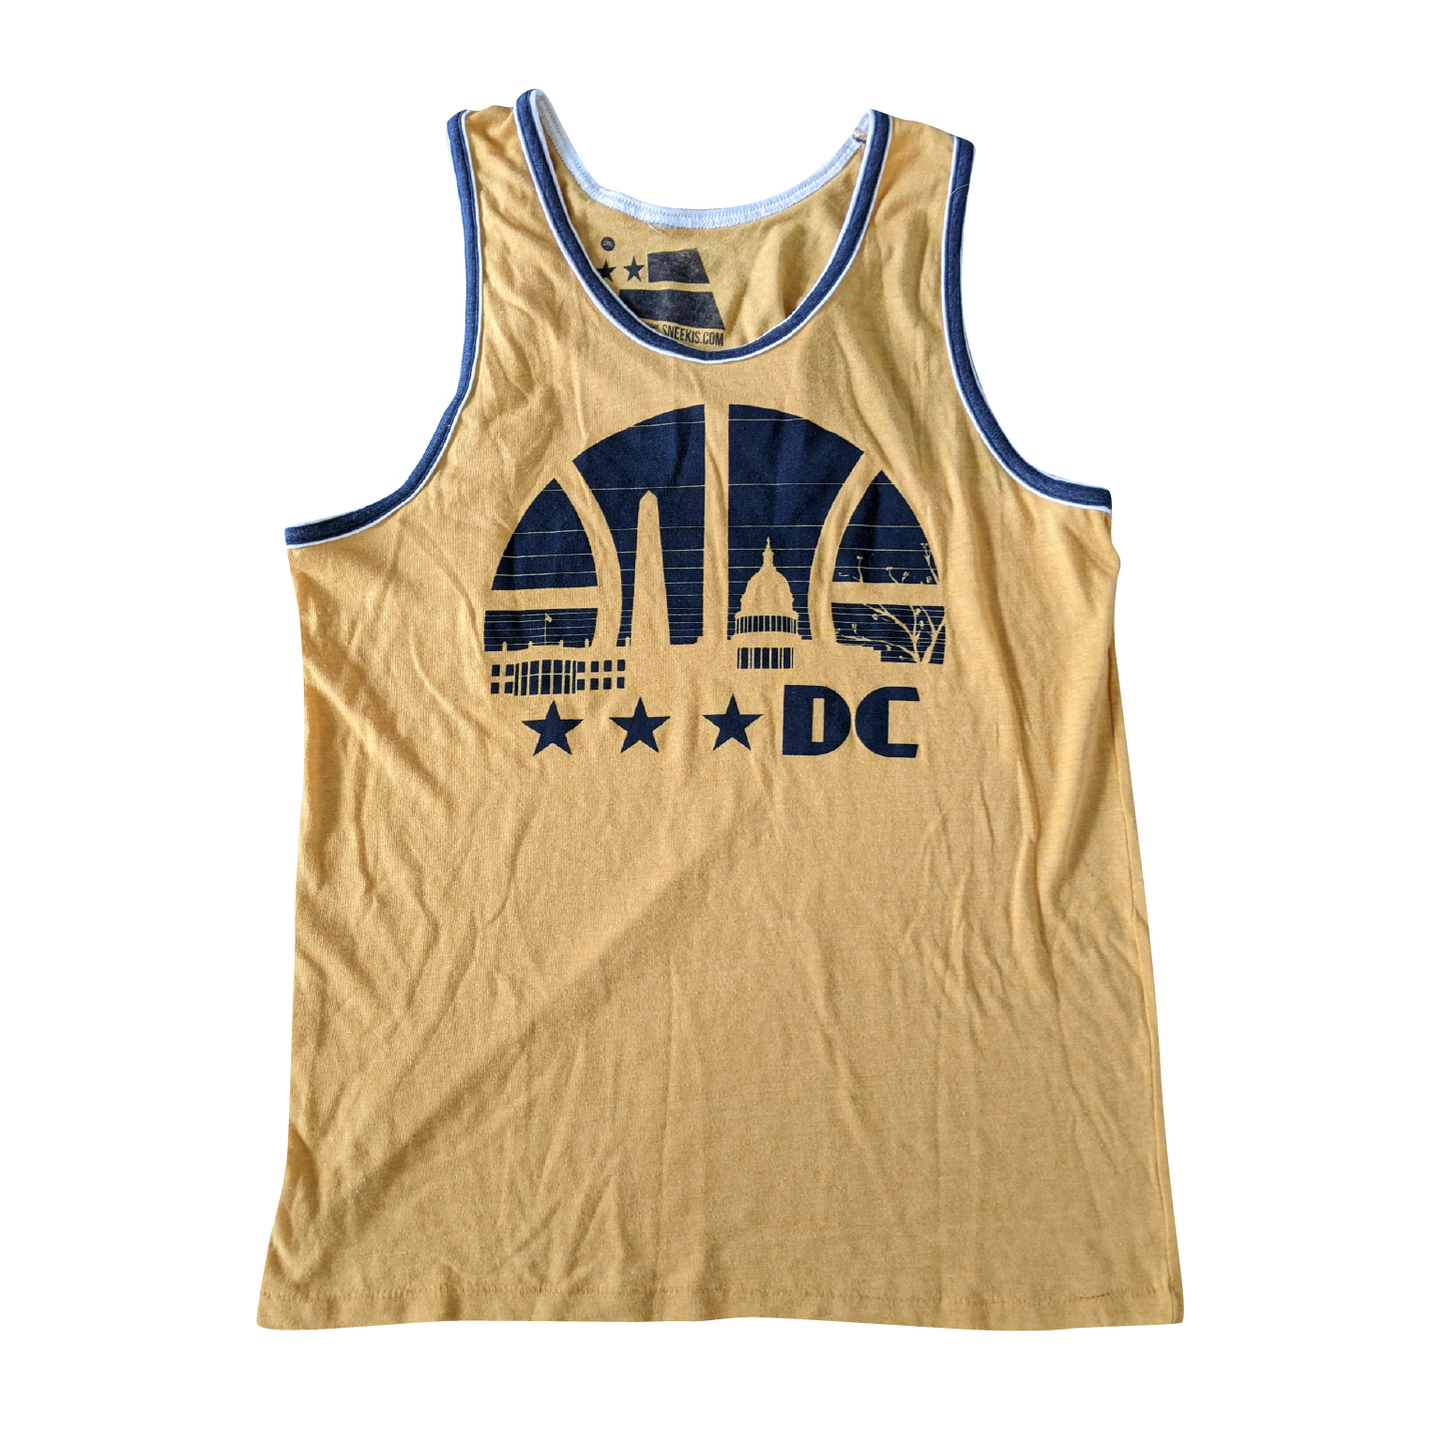 DC Basketball Tank Top - Gold and Navy